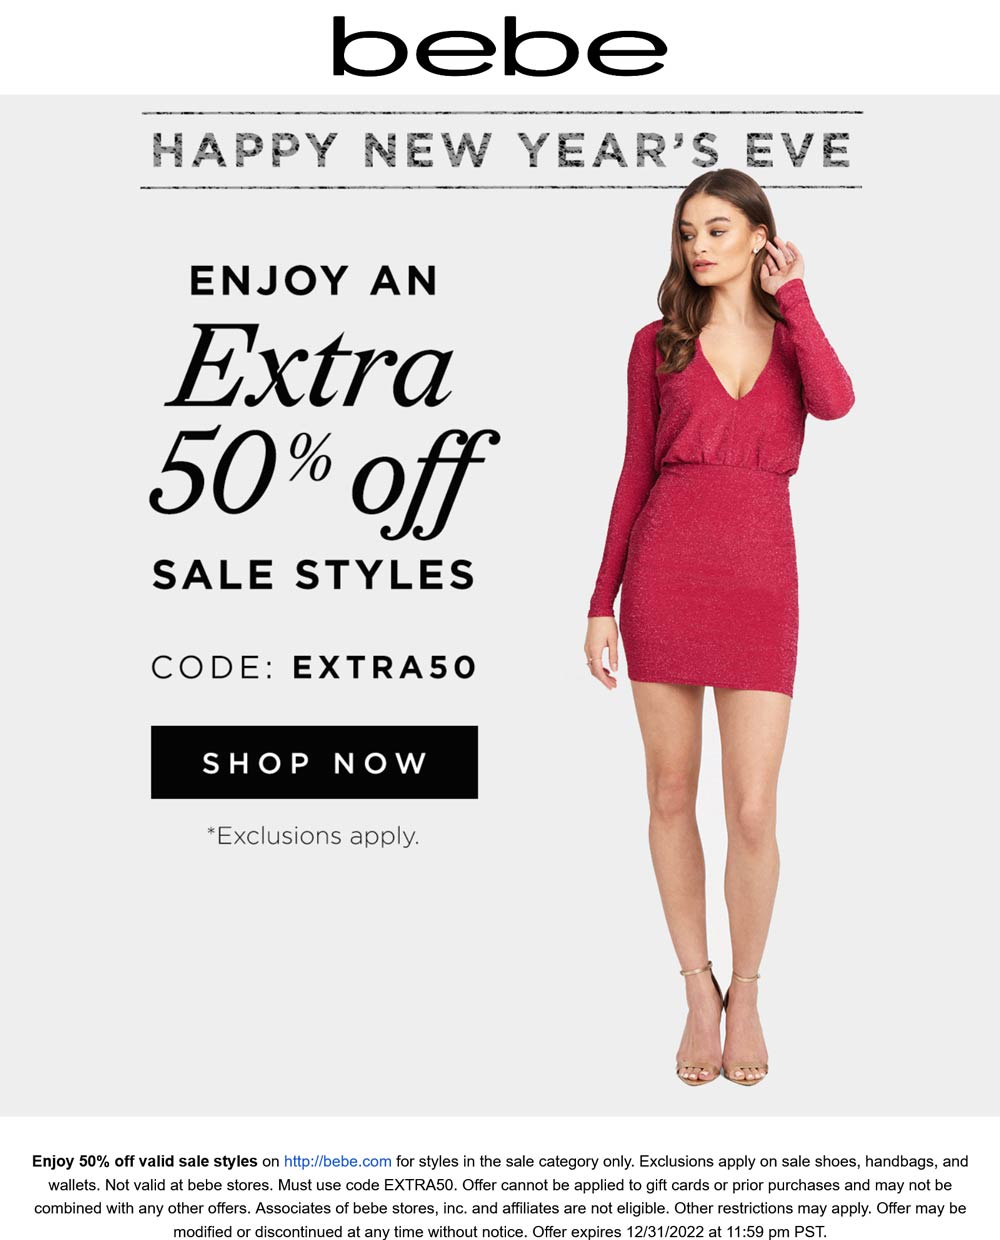 bebe stores Coupon  Extra 50% off sale styles online today at bebe via promo code EXTRA50 #bebe 